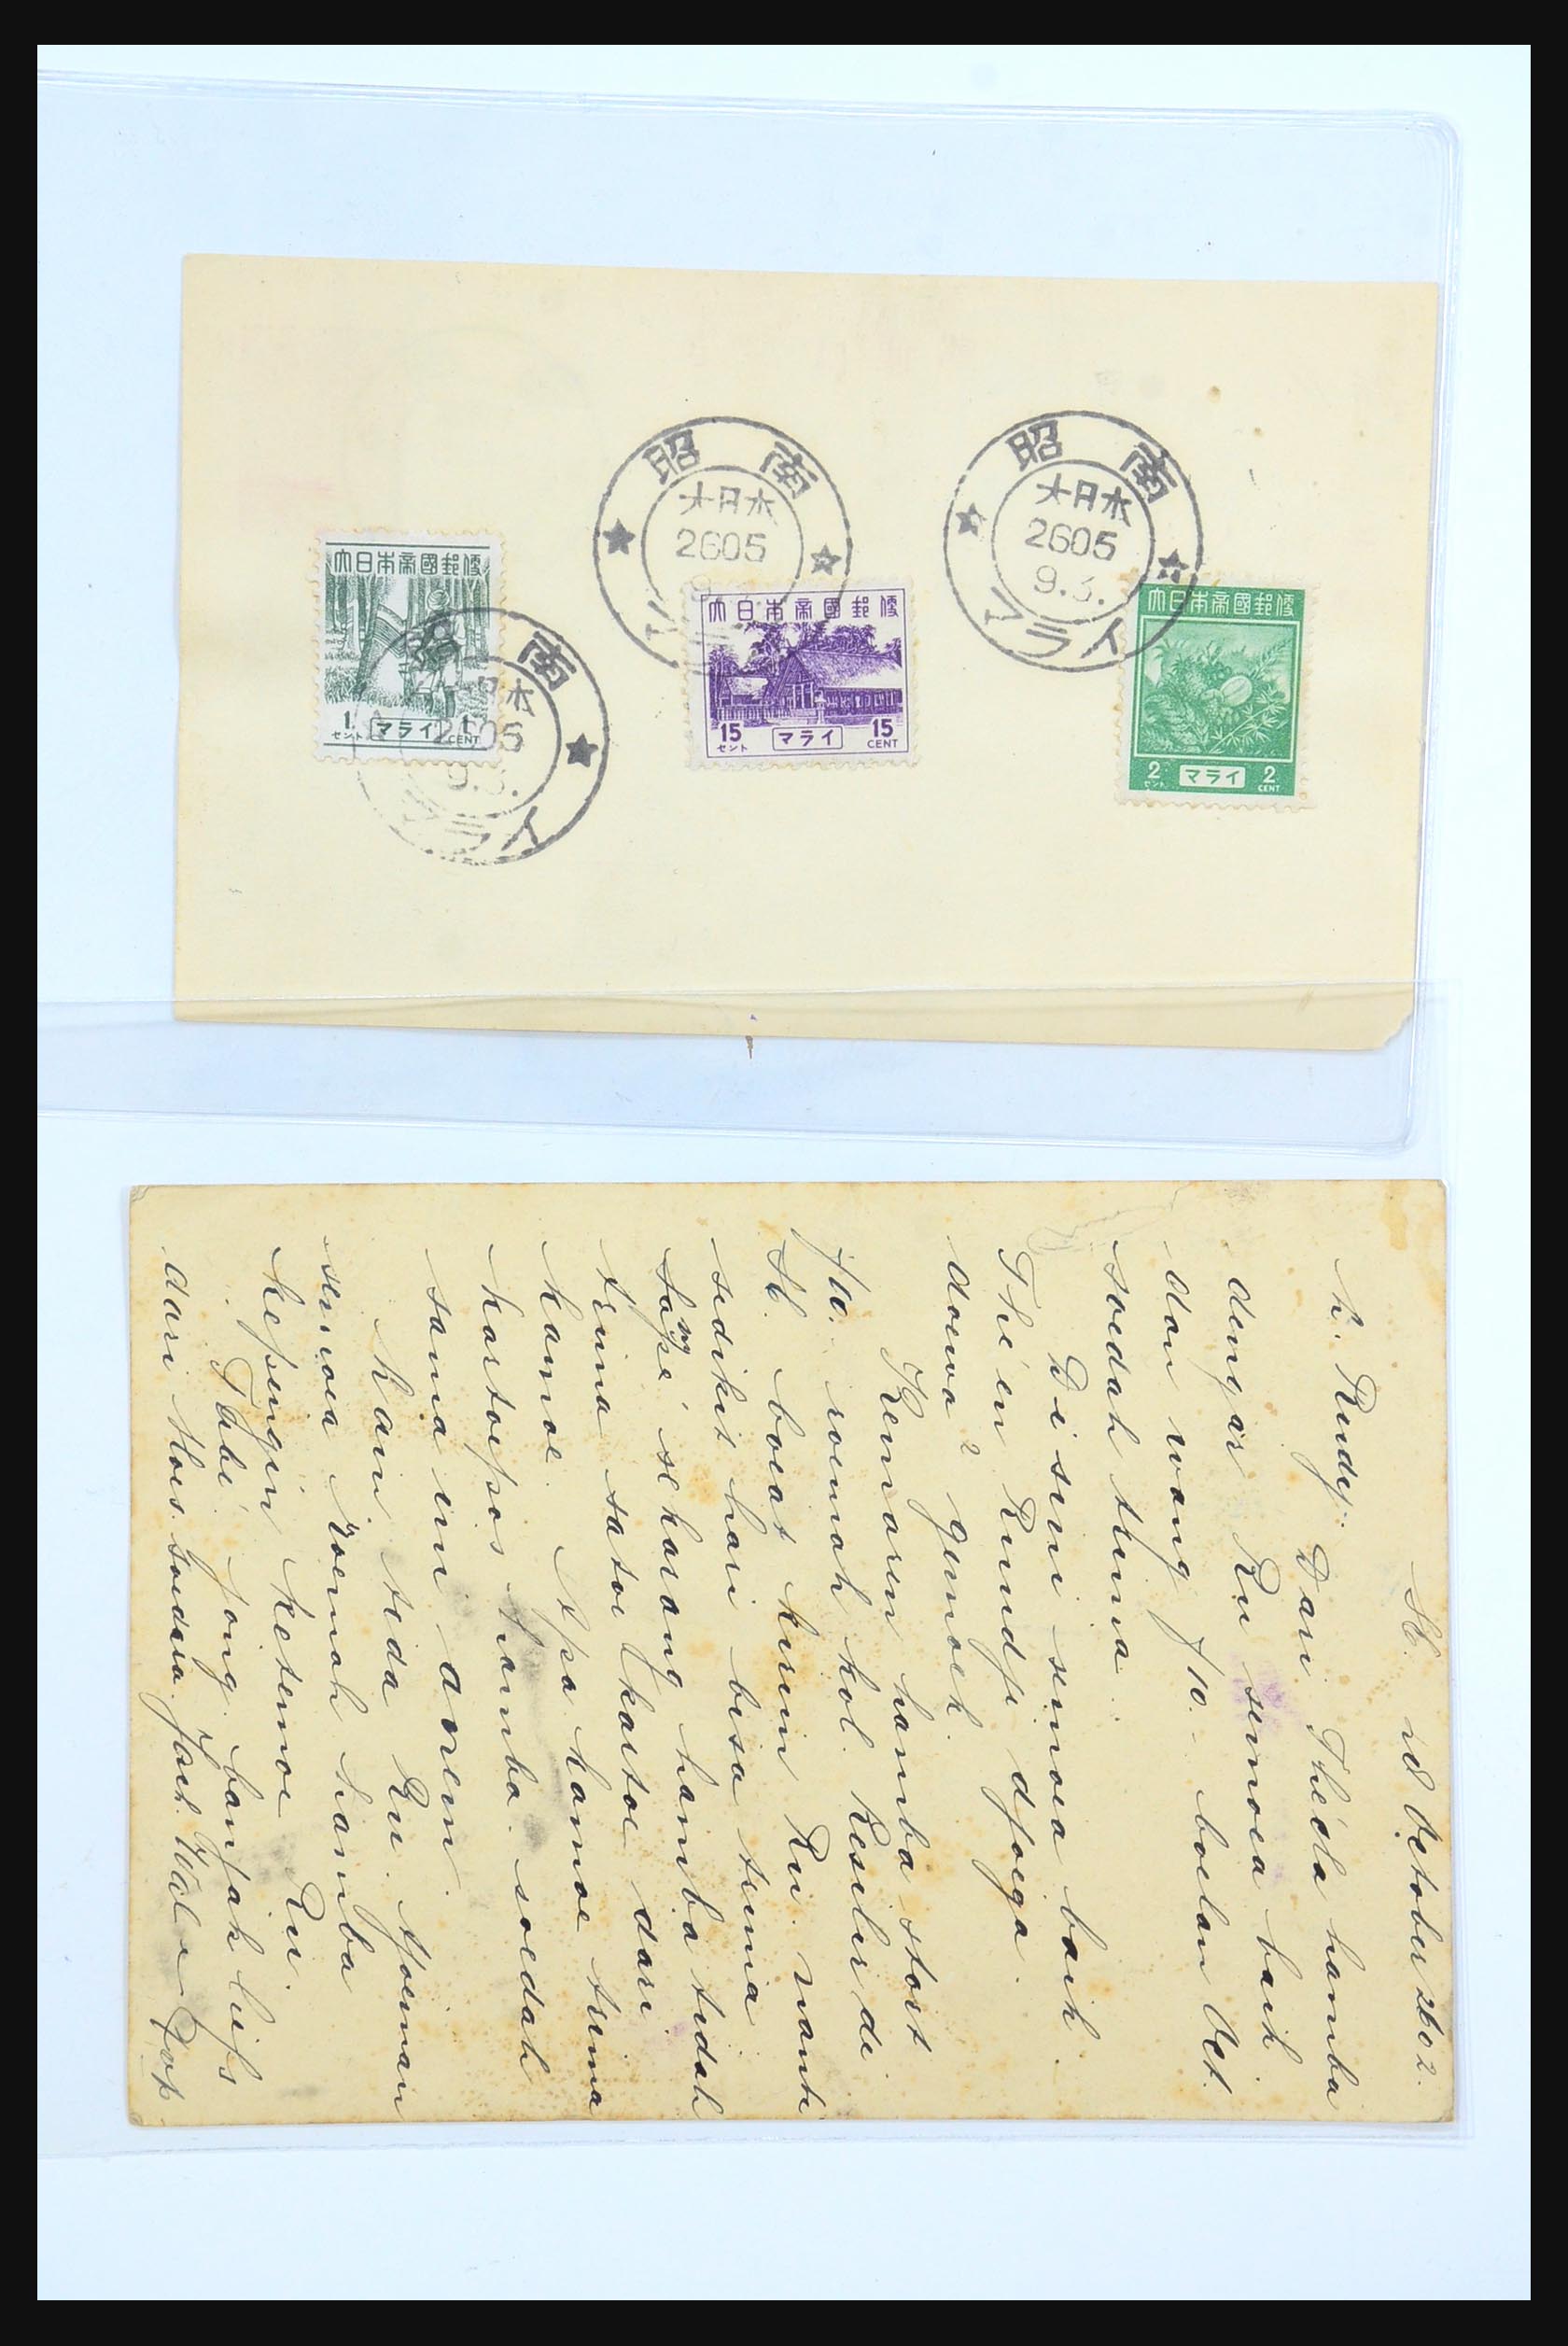 31362 011 - 31362 Netherlands Indies Japanese occupation covers 1942-1945.